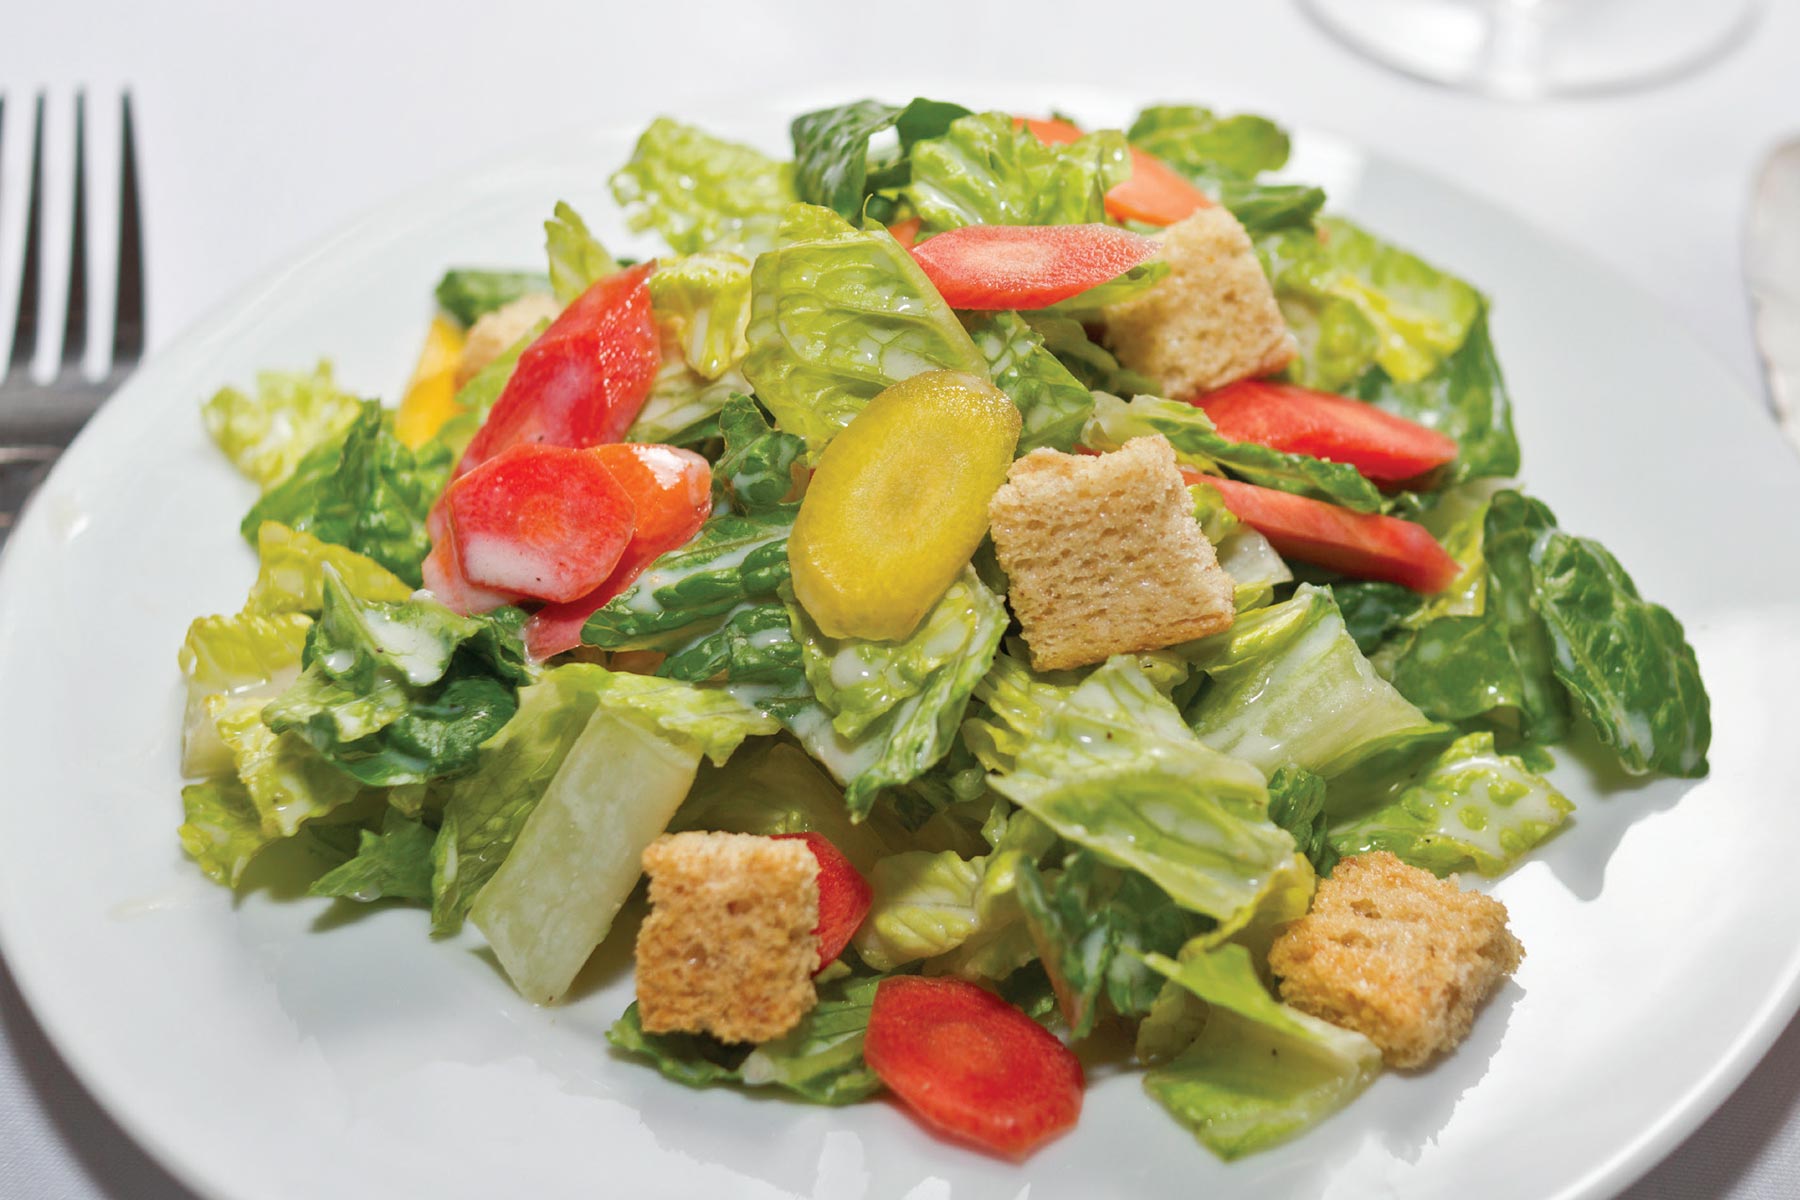 This Vegan Caesar Salad recipe is Ornish Lifestyle Medicine™ Approved and posted by Sentara Healthcare in Hampton Roads